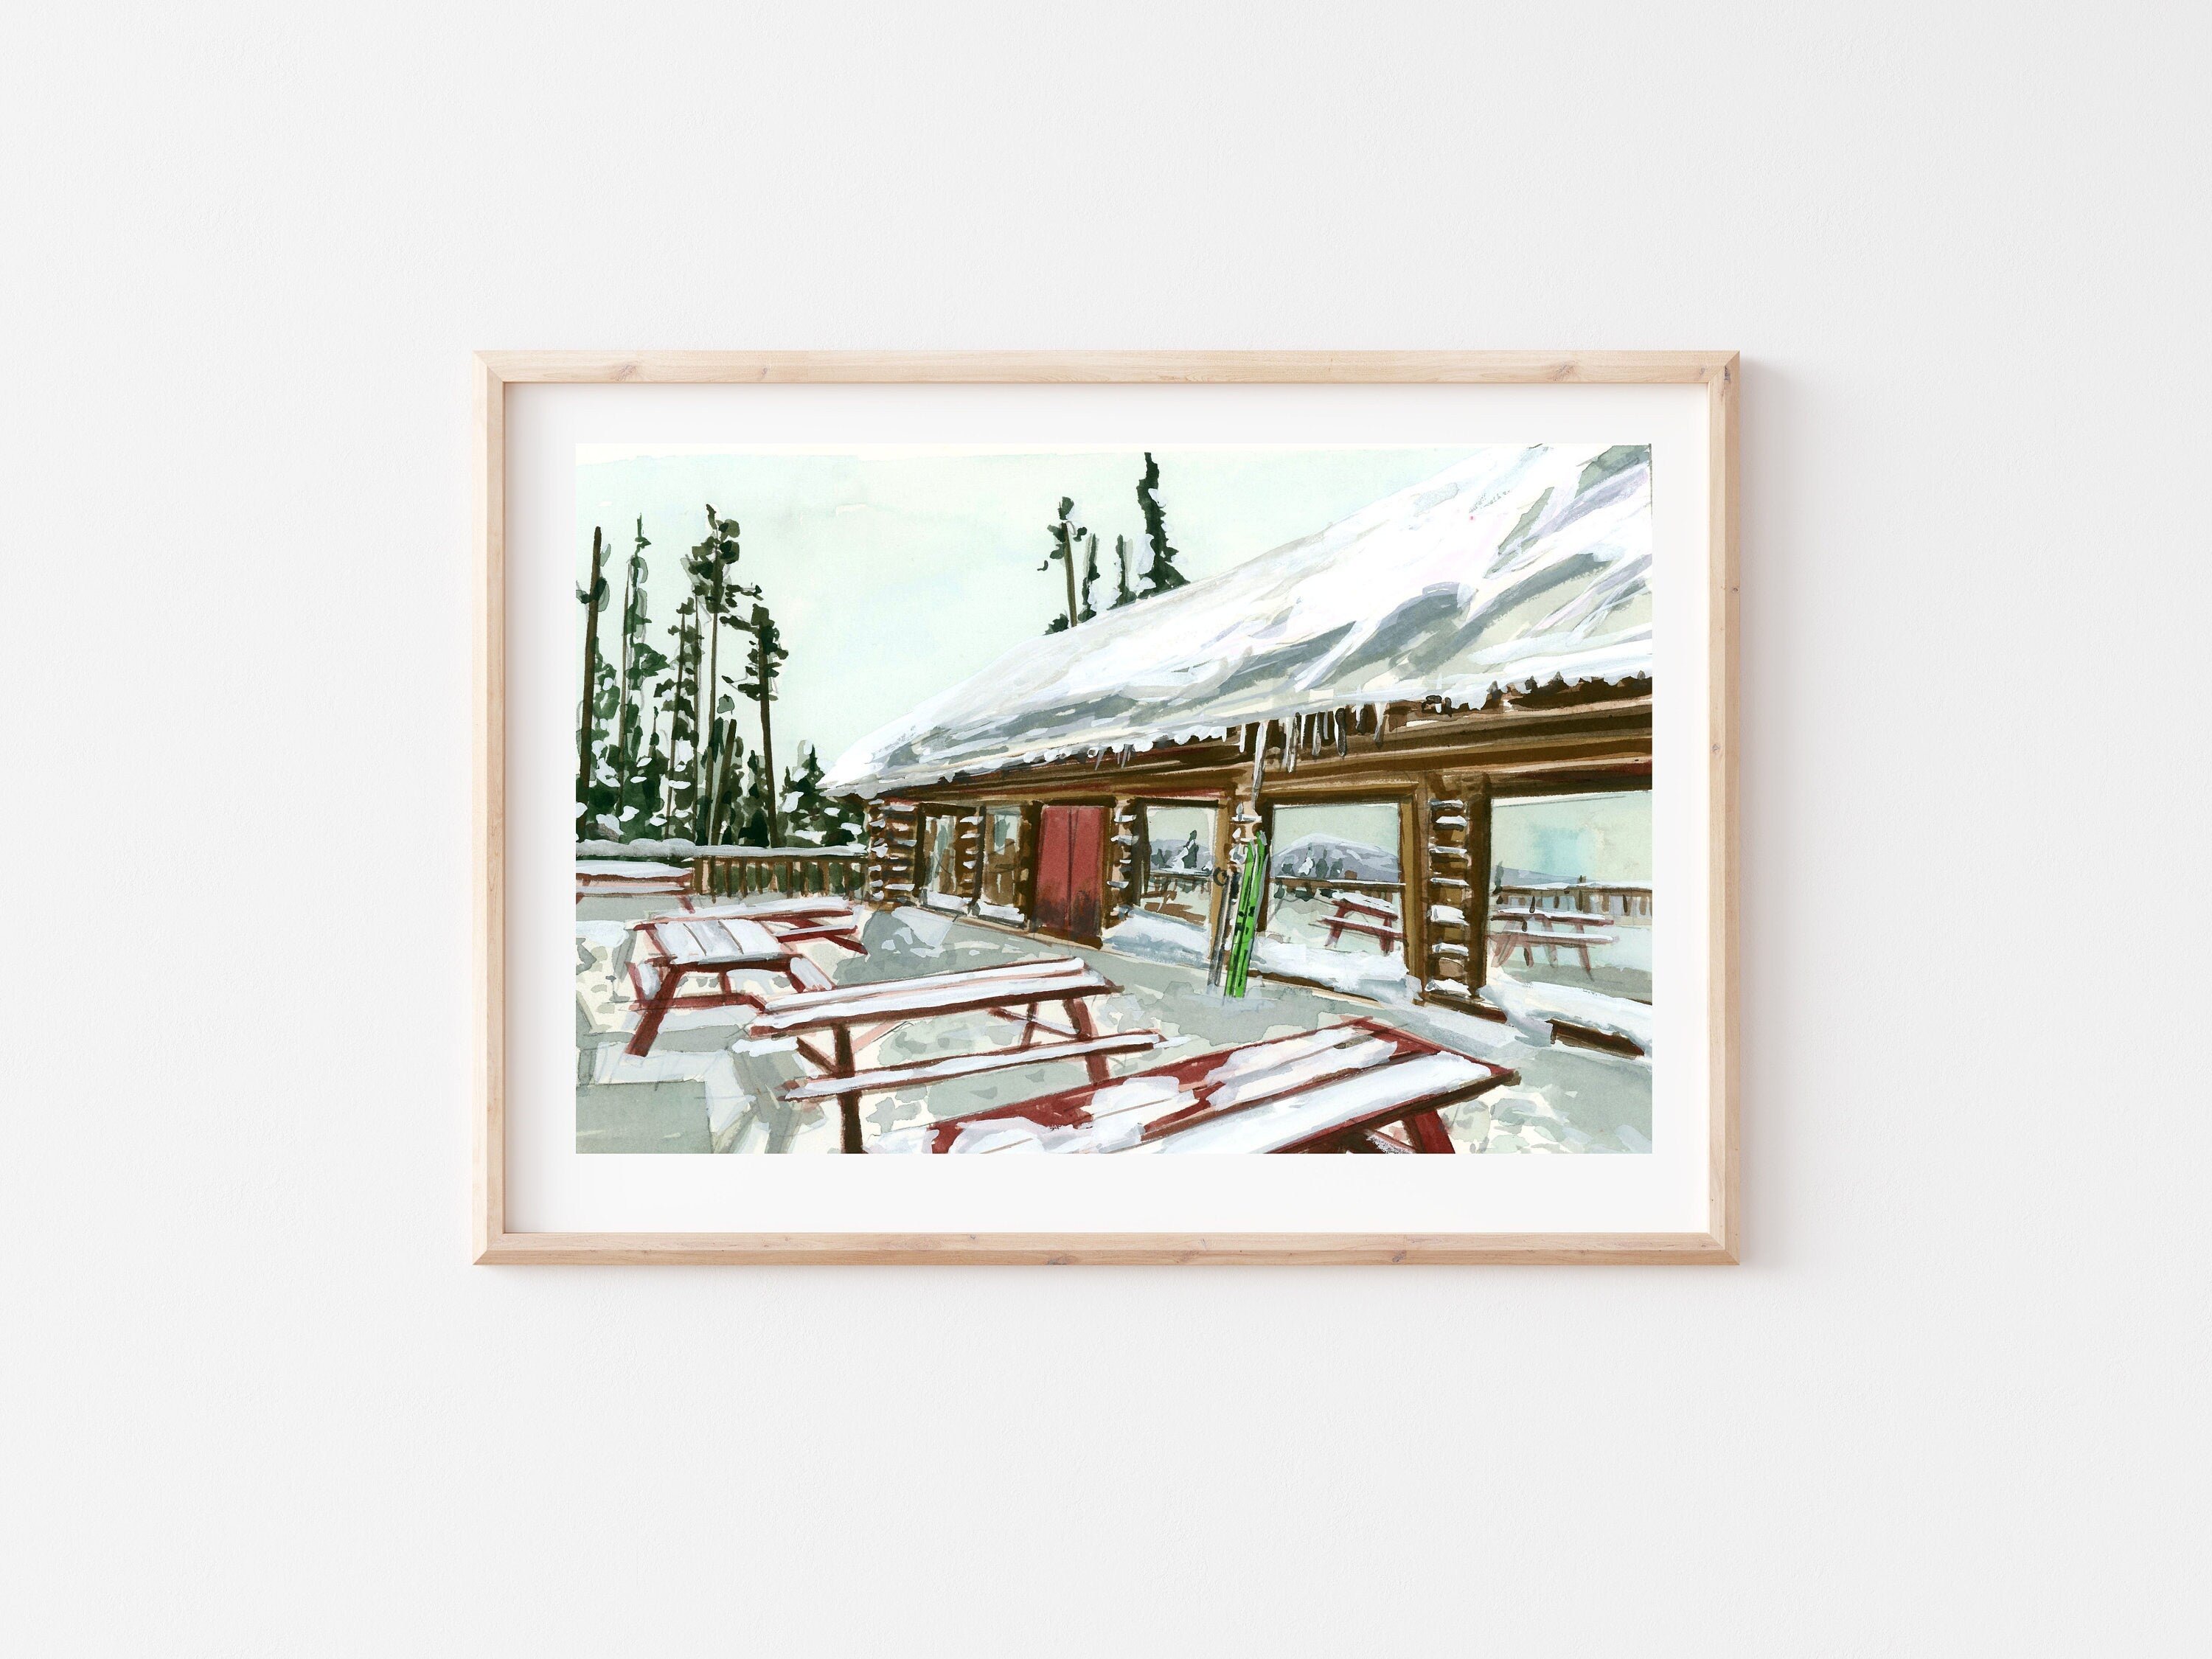 Snowy ski lodge print of painting by Medjool Studio. Print of an original gouache painting of a snowy ski lodge in at the Kimberely ski hill in the Canadian rocky mountains.